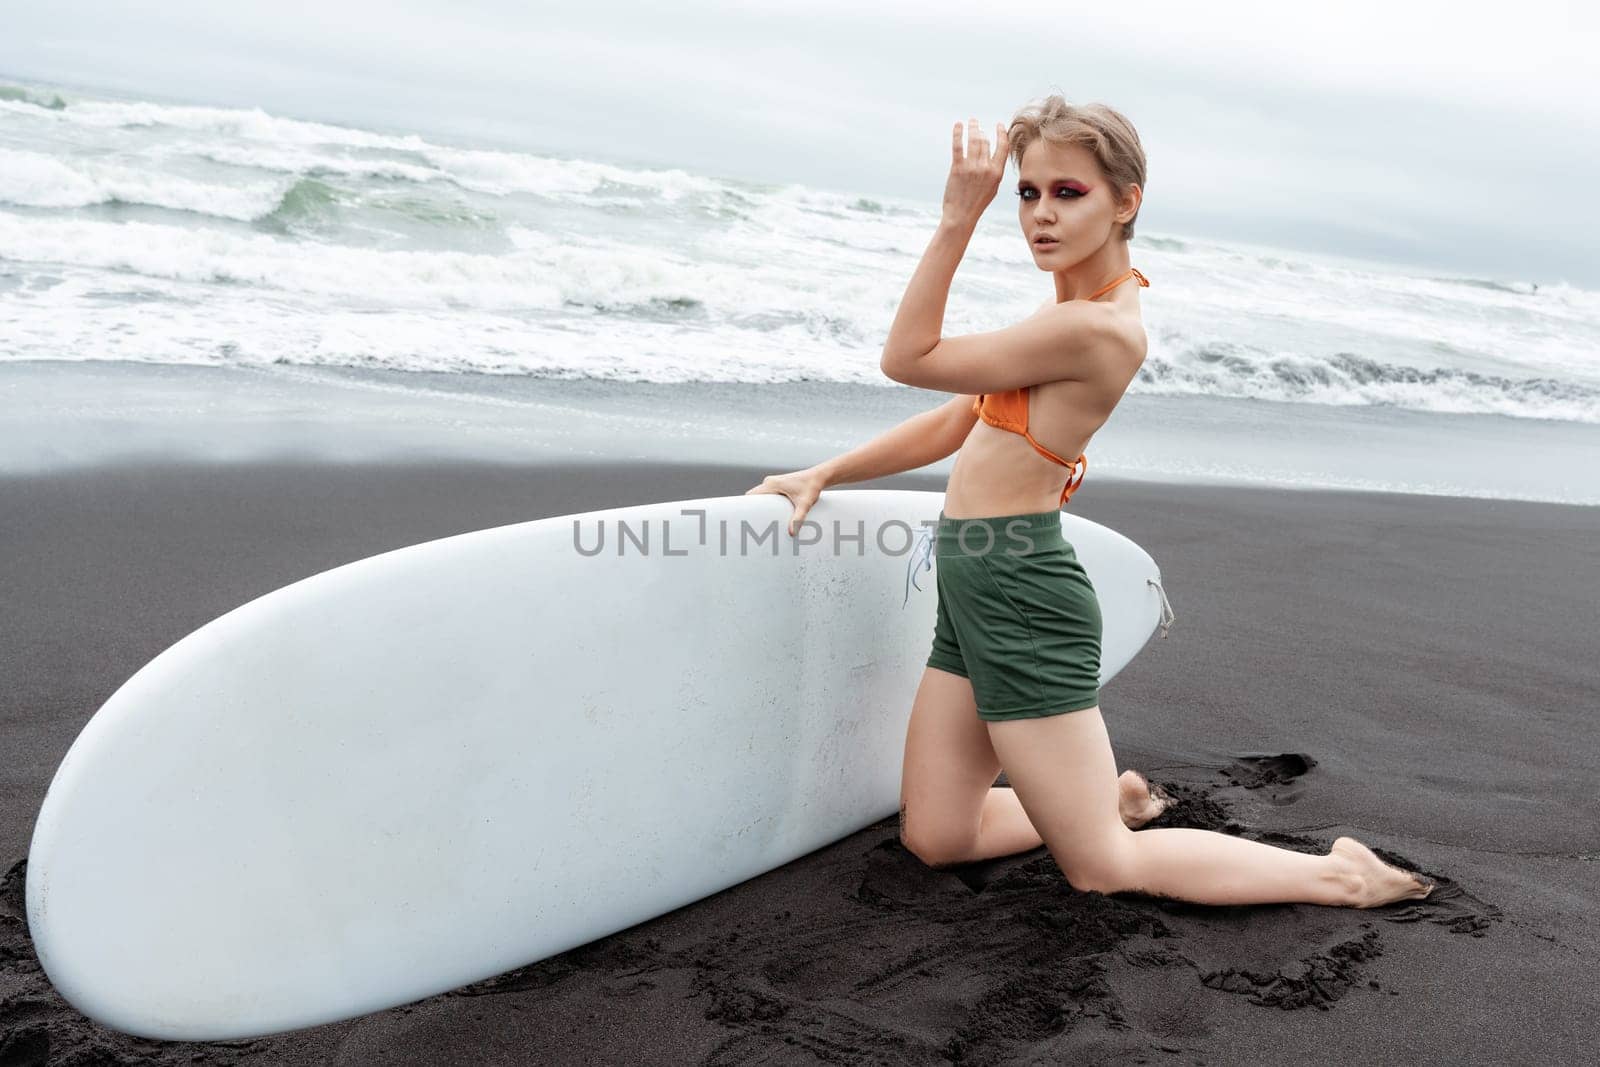 Female surfer kneeling on black sand of beach, holding her surfboard in hands and looking at camera. Sportswoman clearly skilled and passionate rider who has great deal of experience and knowledge